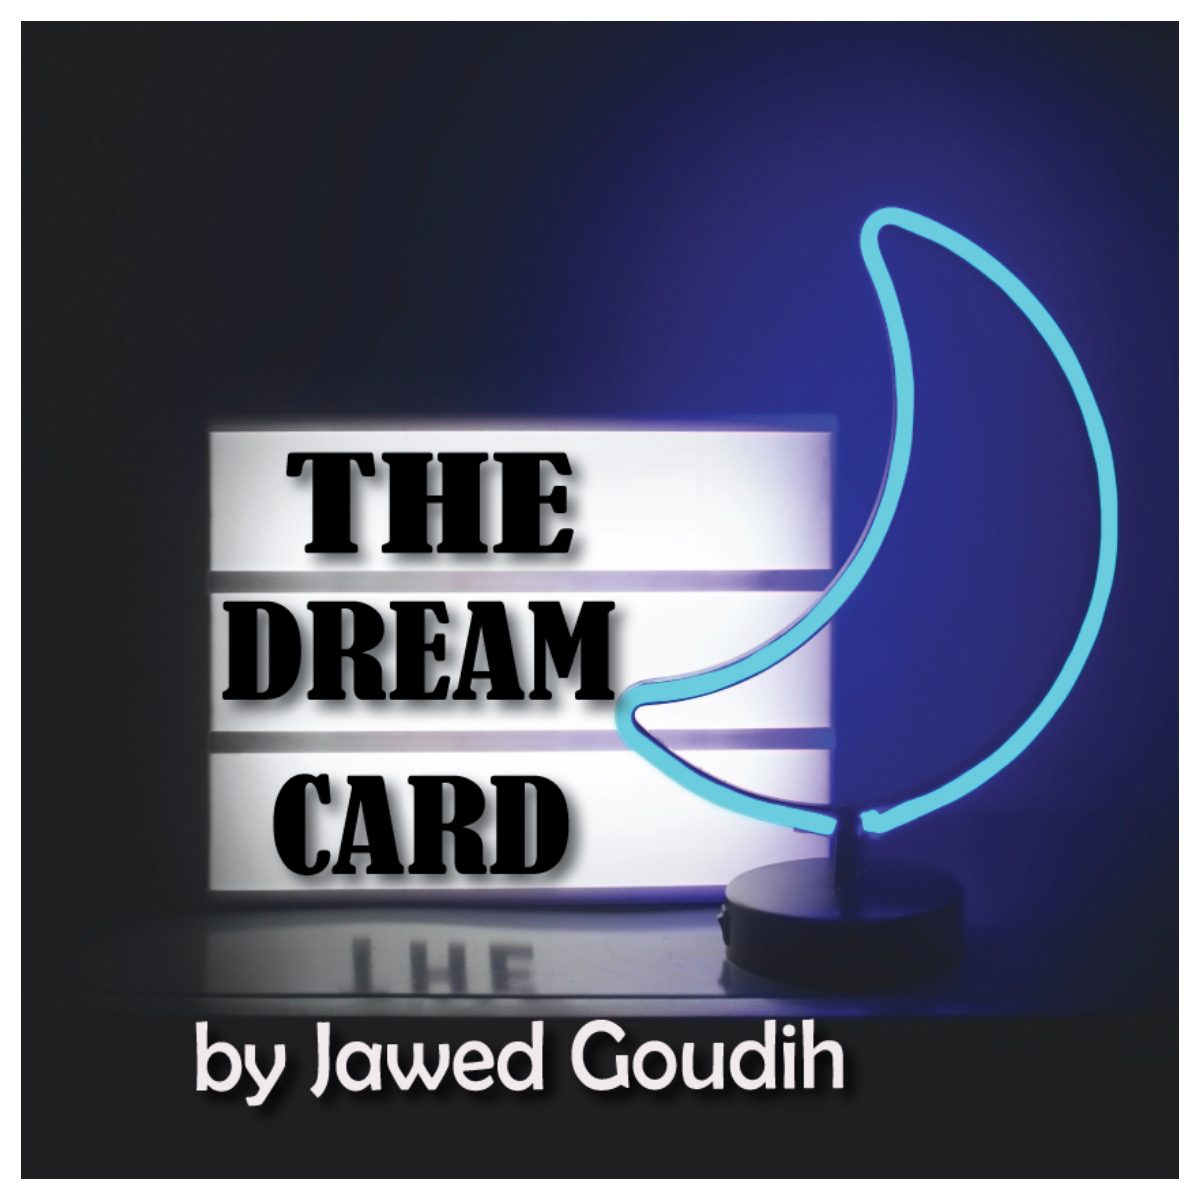 The Dream Card by Jawed Goudih (MP4 Video Download 1080p FullHD Quality)